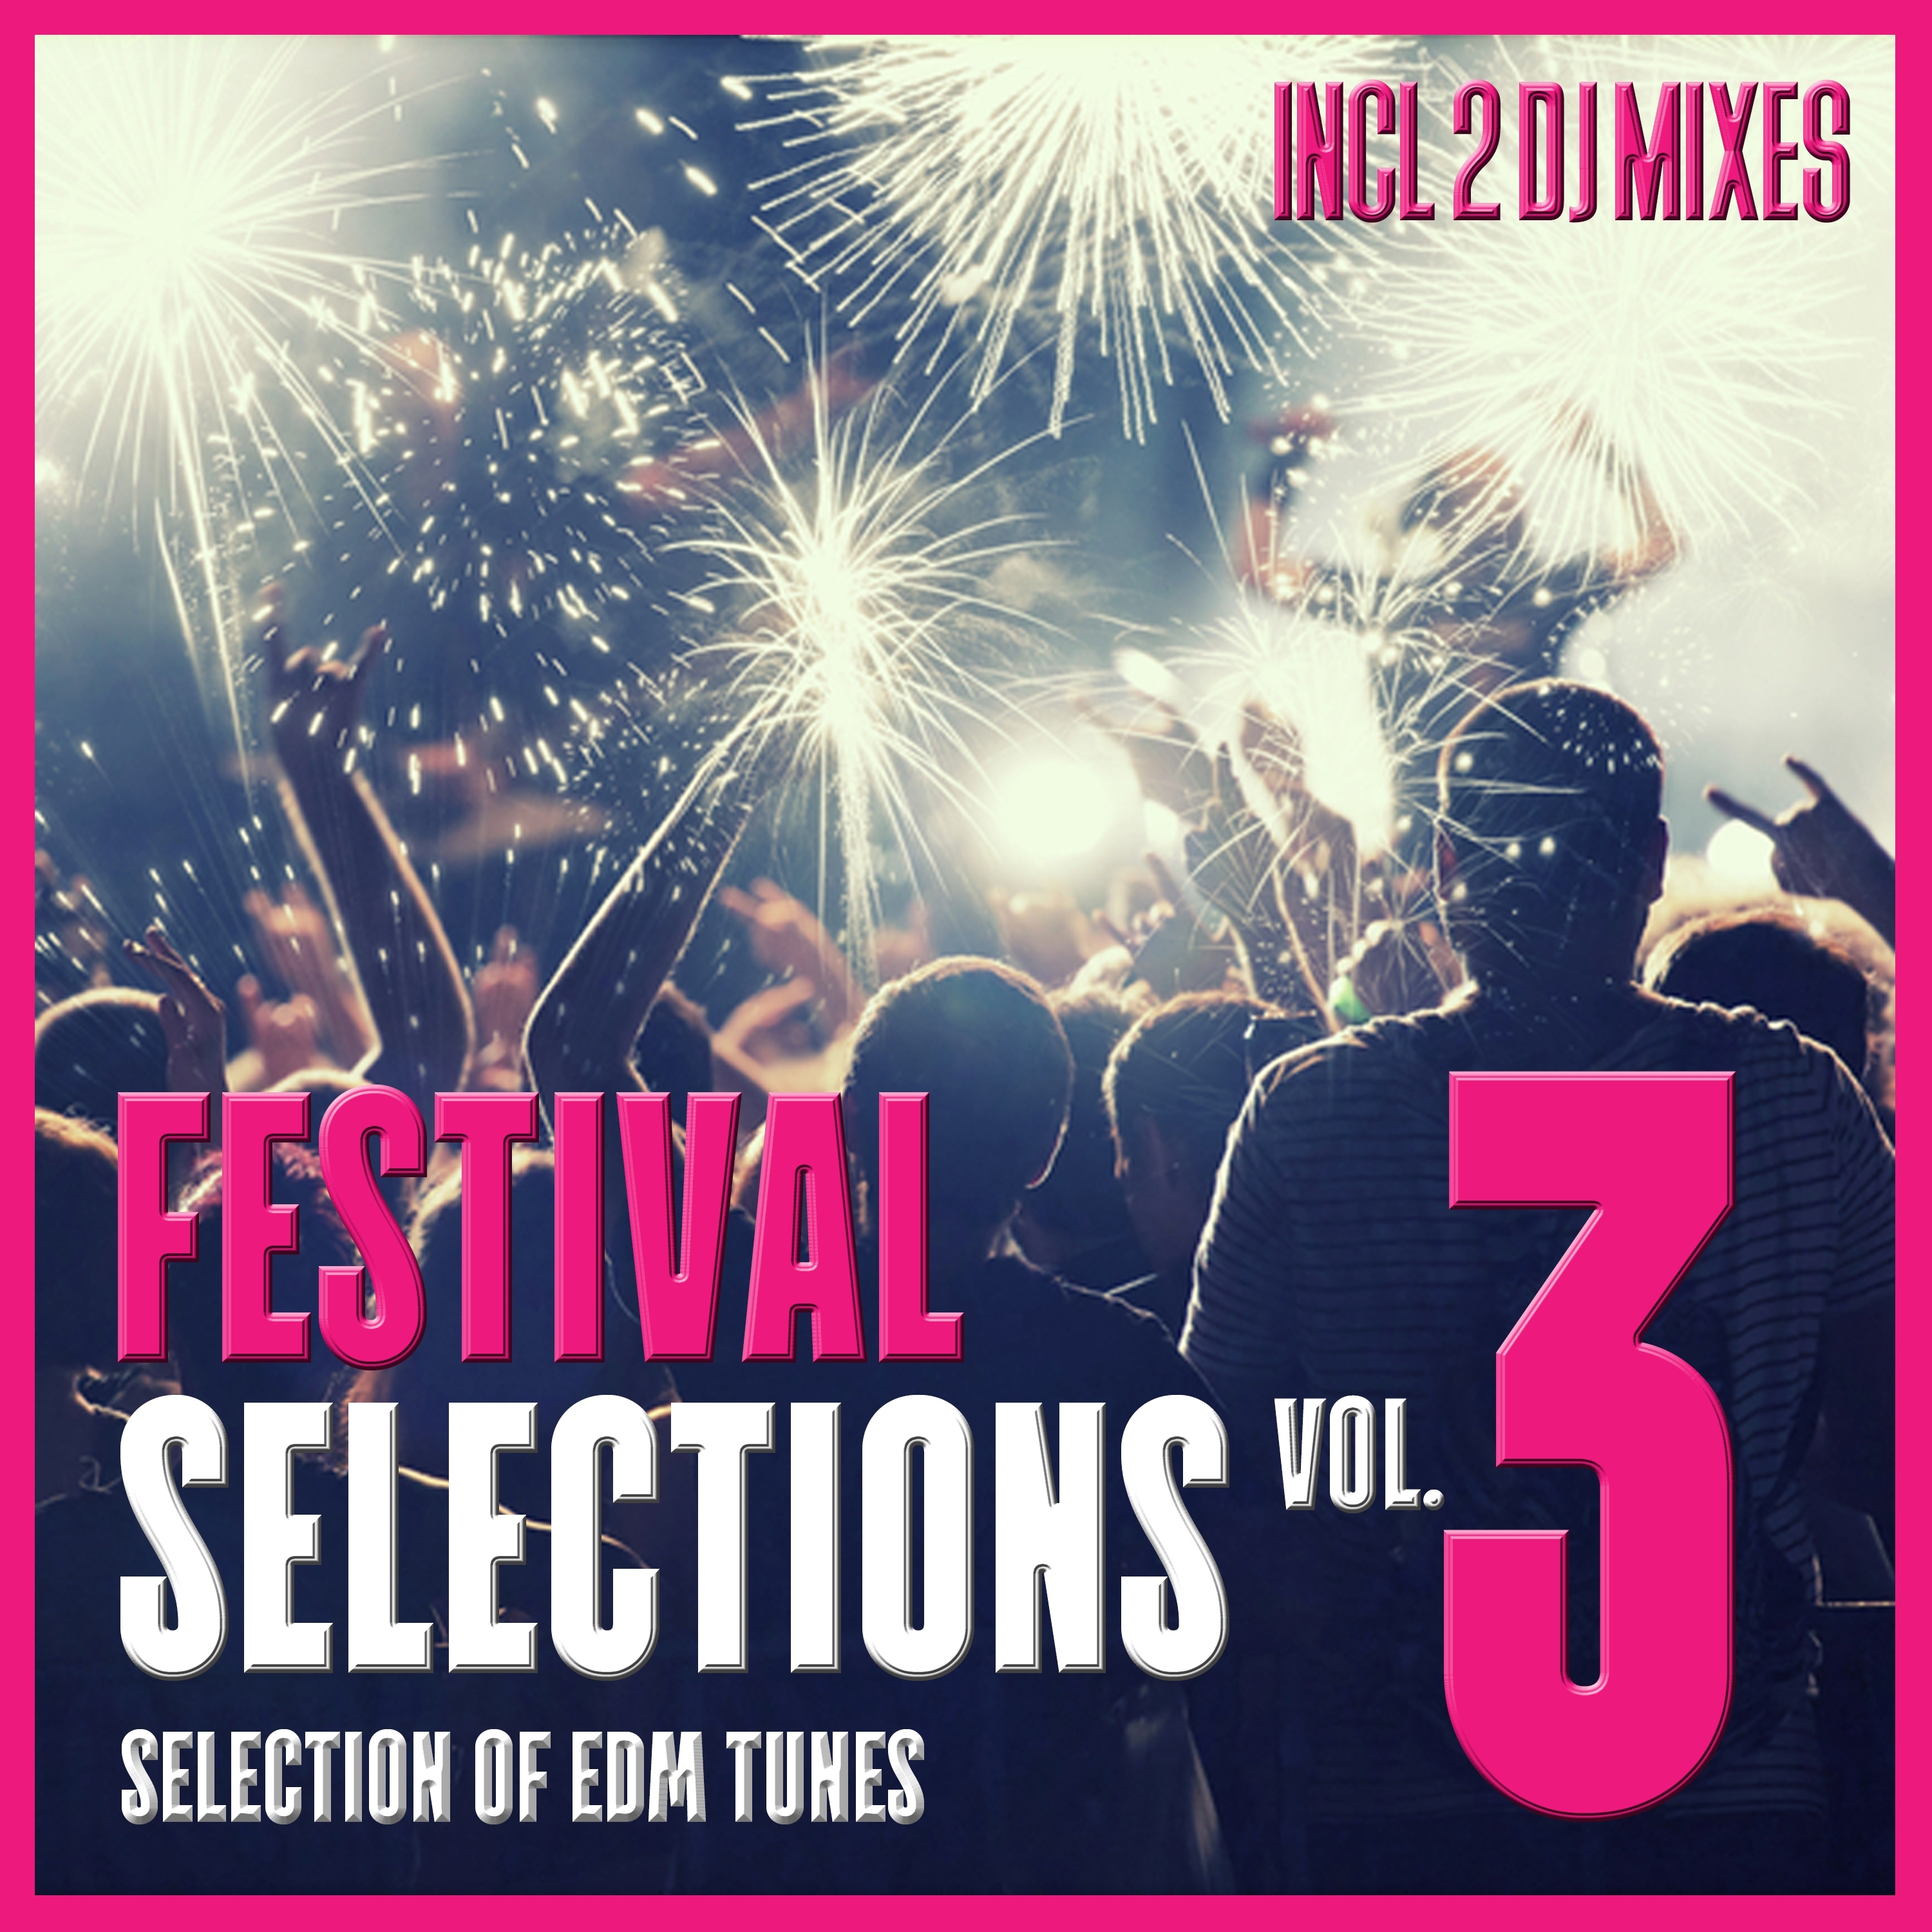 Festival Selections, Vol. 3 (Mixed By Terrie Francys Junior) [60 Min Festival Outdoor Selection - Continuous DJ Mix]